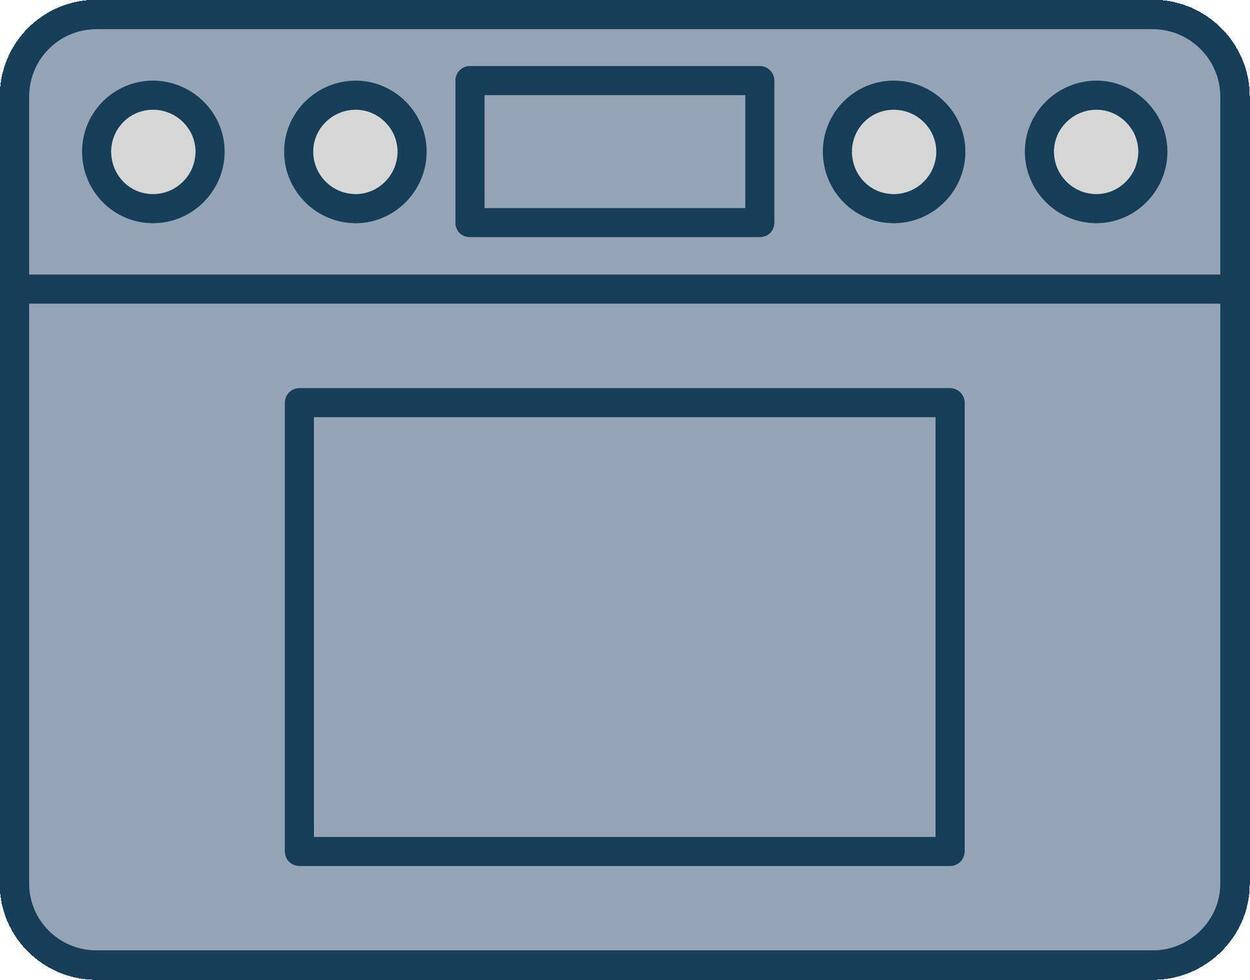 Oven Line Filled Grey Icon vector